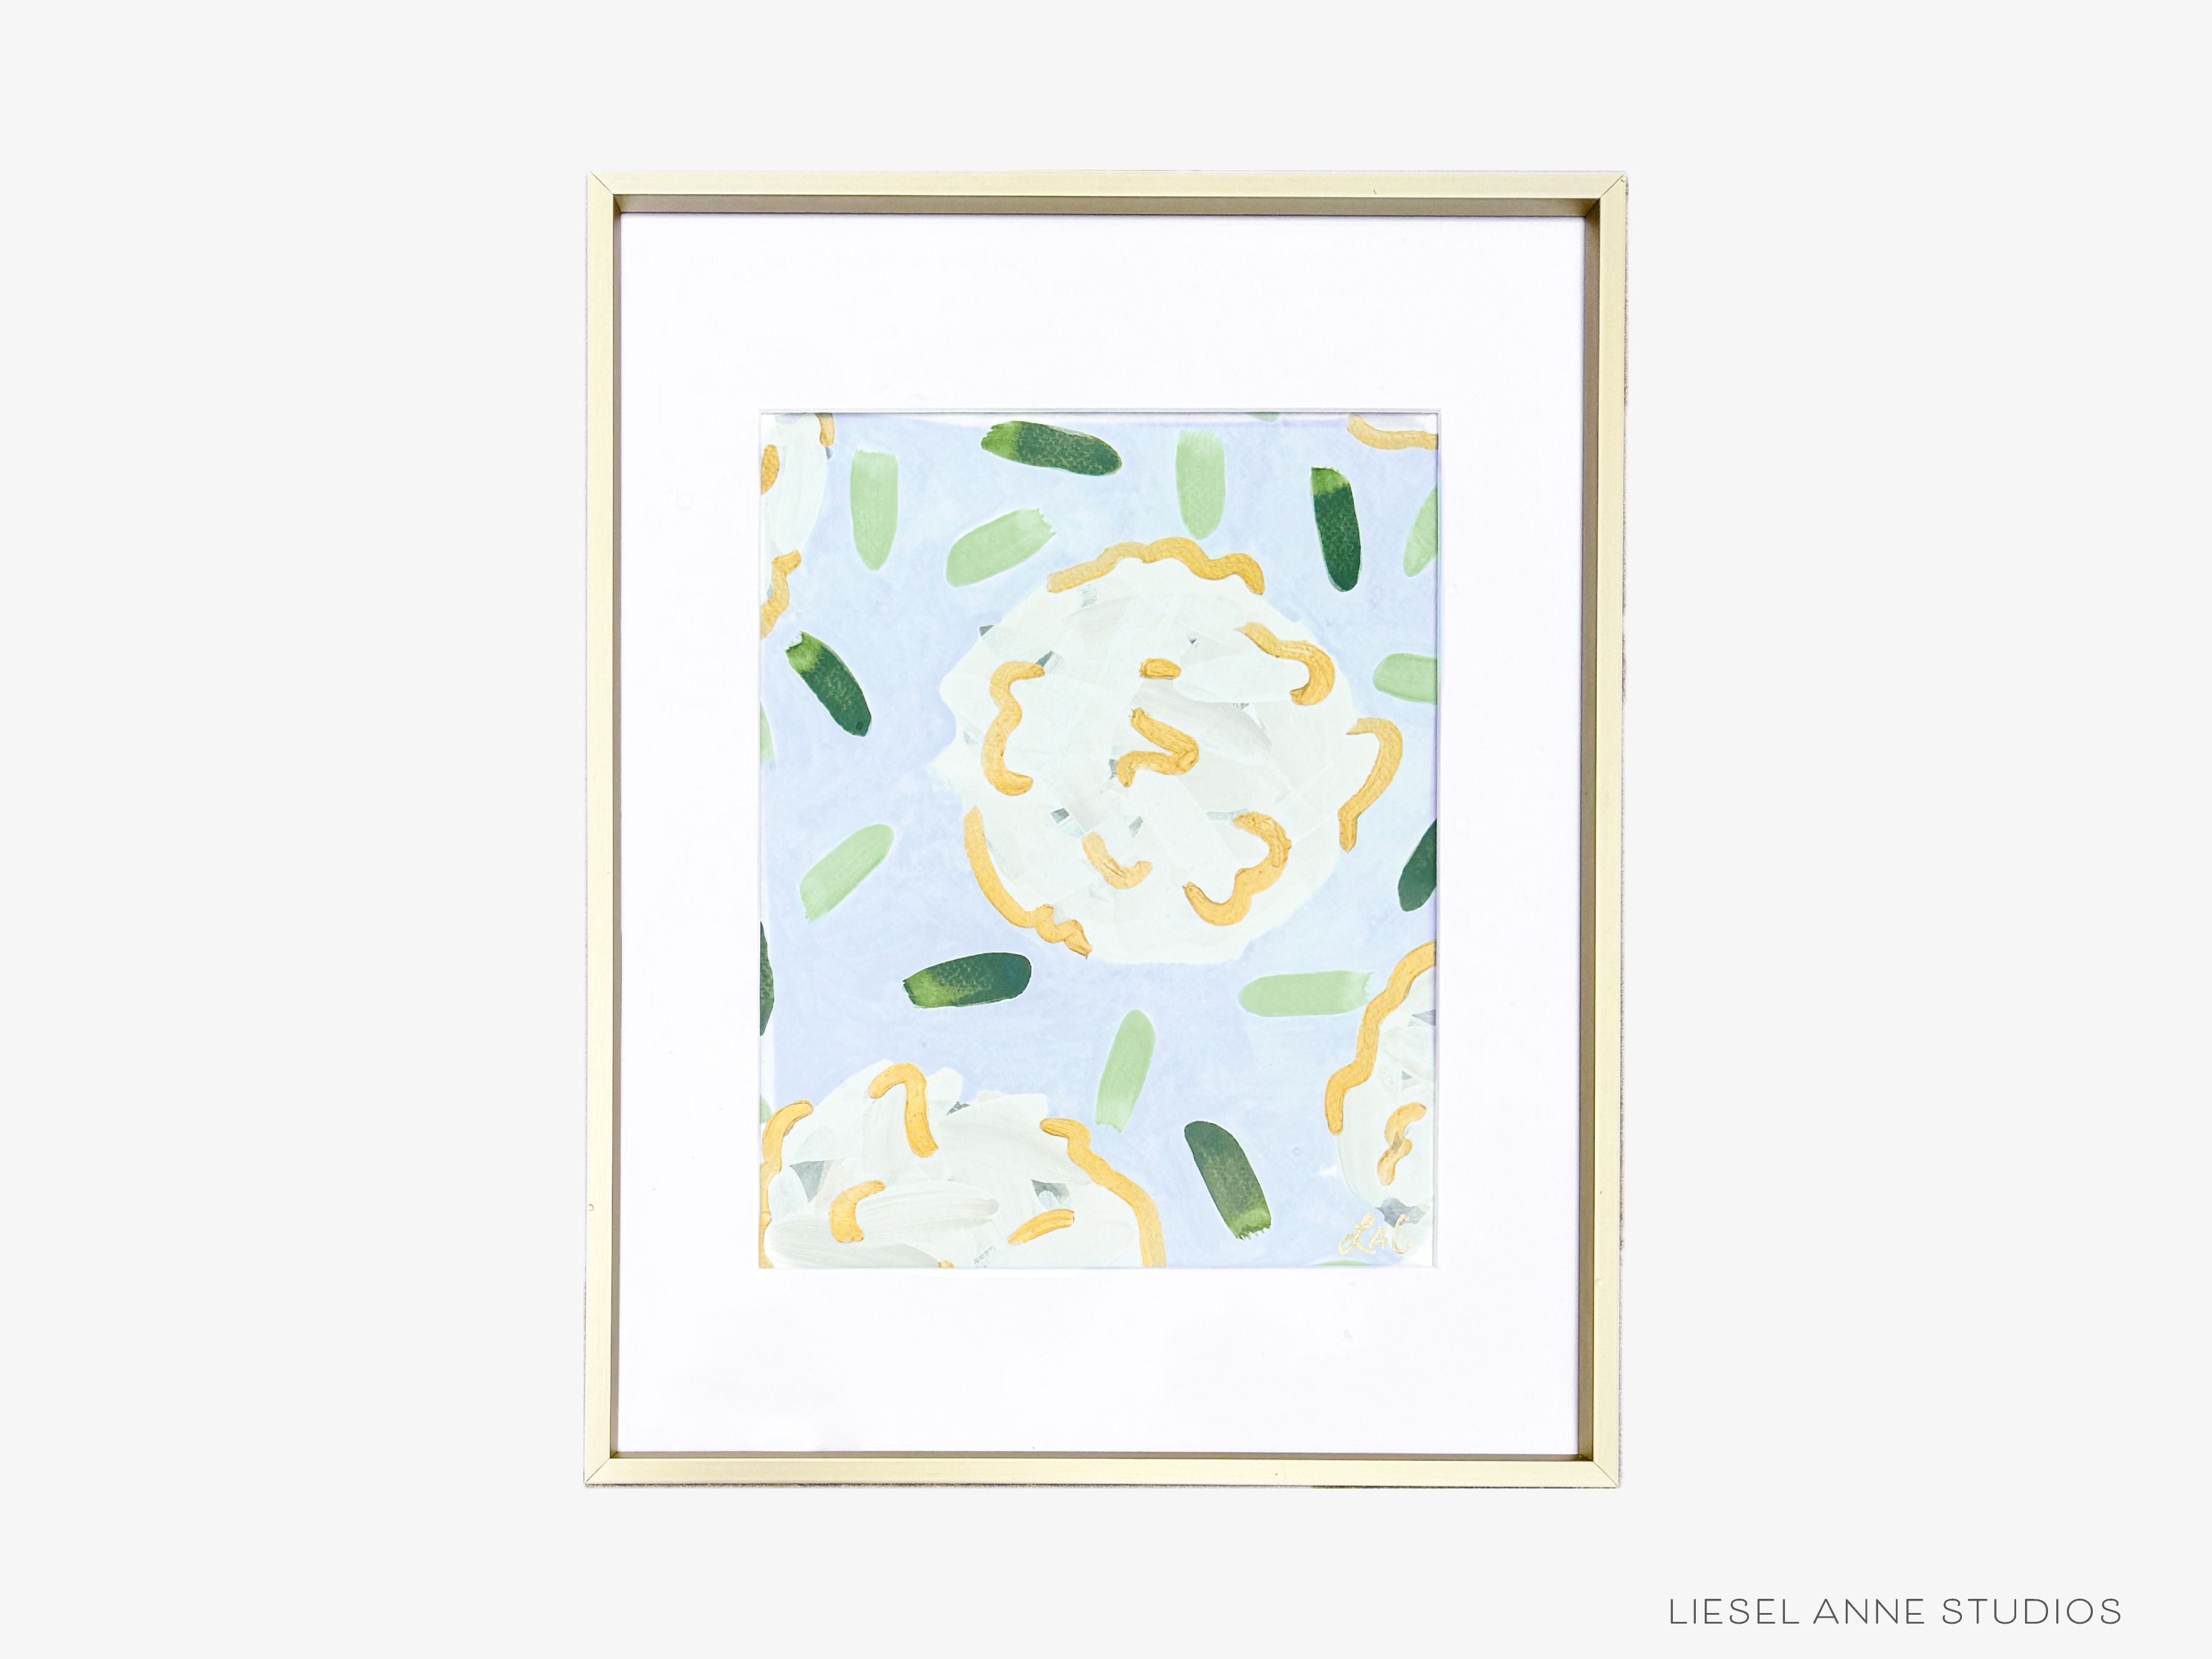 Golden Hydrangea | Blue & White X-Original artwork measures 8"x10" | Hand-Painted with gouache on cold press watercolor paper | Matted and framed in gold wood frame sized 11"x14" | UV shielding acrylic glass | Hanging hardware included | Features our signature Golden Hydrangea design with a light blue base, white hydrangeas and shimmery gold accents | Initialed in gold by the Liesel Anne (the artist) on the front and signed and dated on the back.-The Singing Little Bird